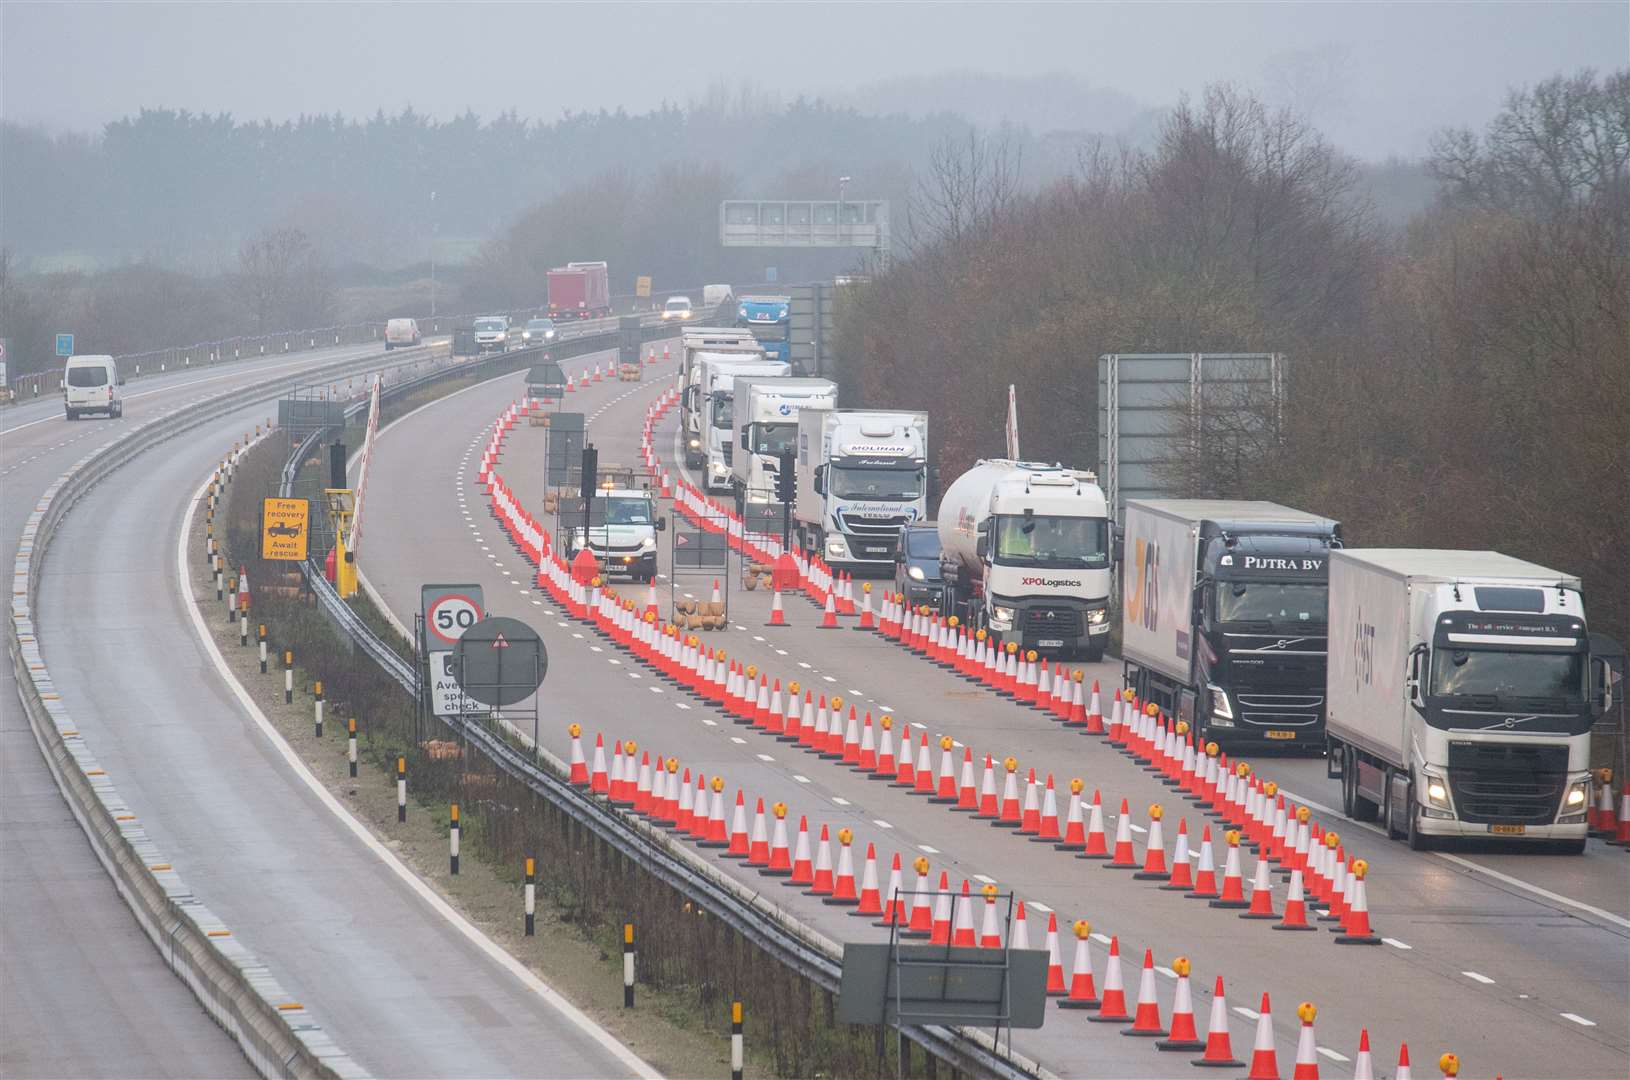 Freight lorries separated from other traffic on a Dover-bound section of the M20 motorway in Kent (Dominic Lipinski/PA)